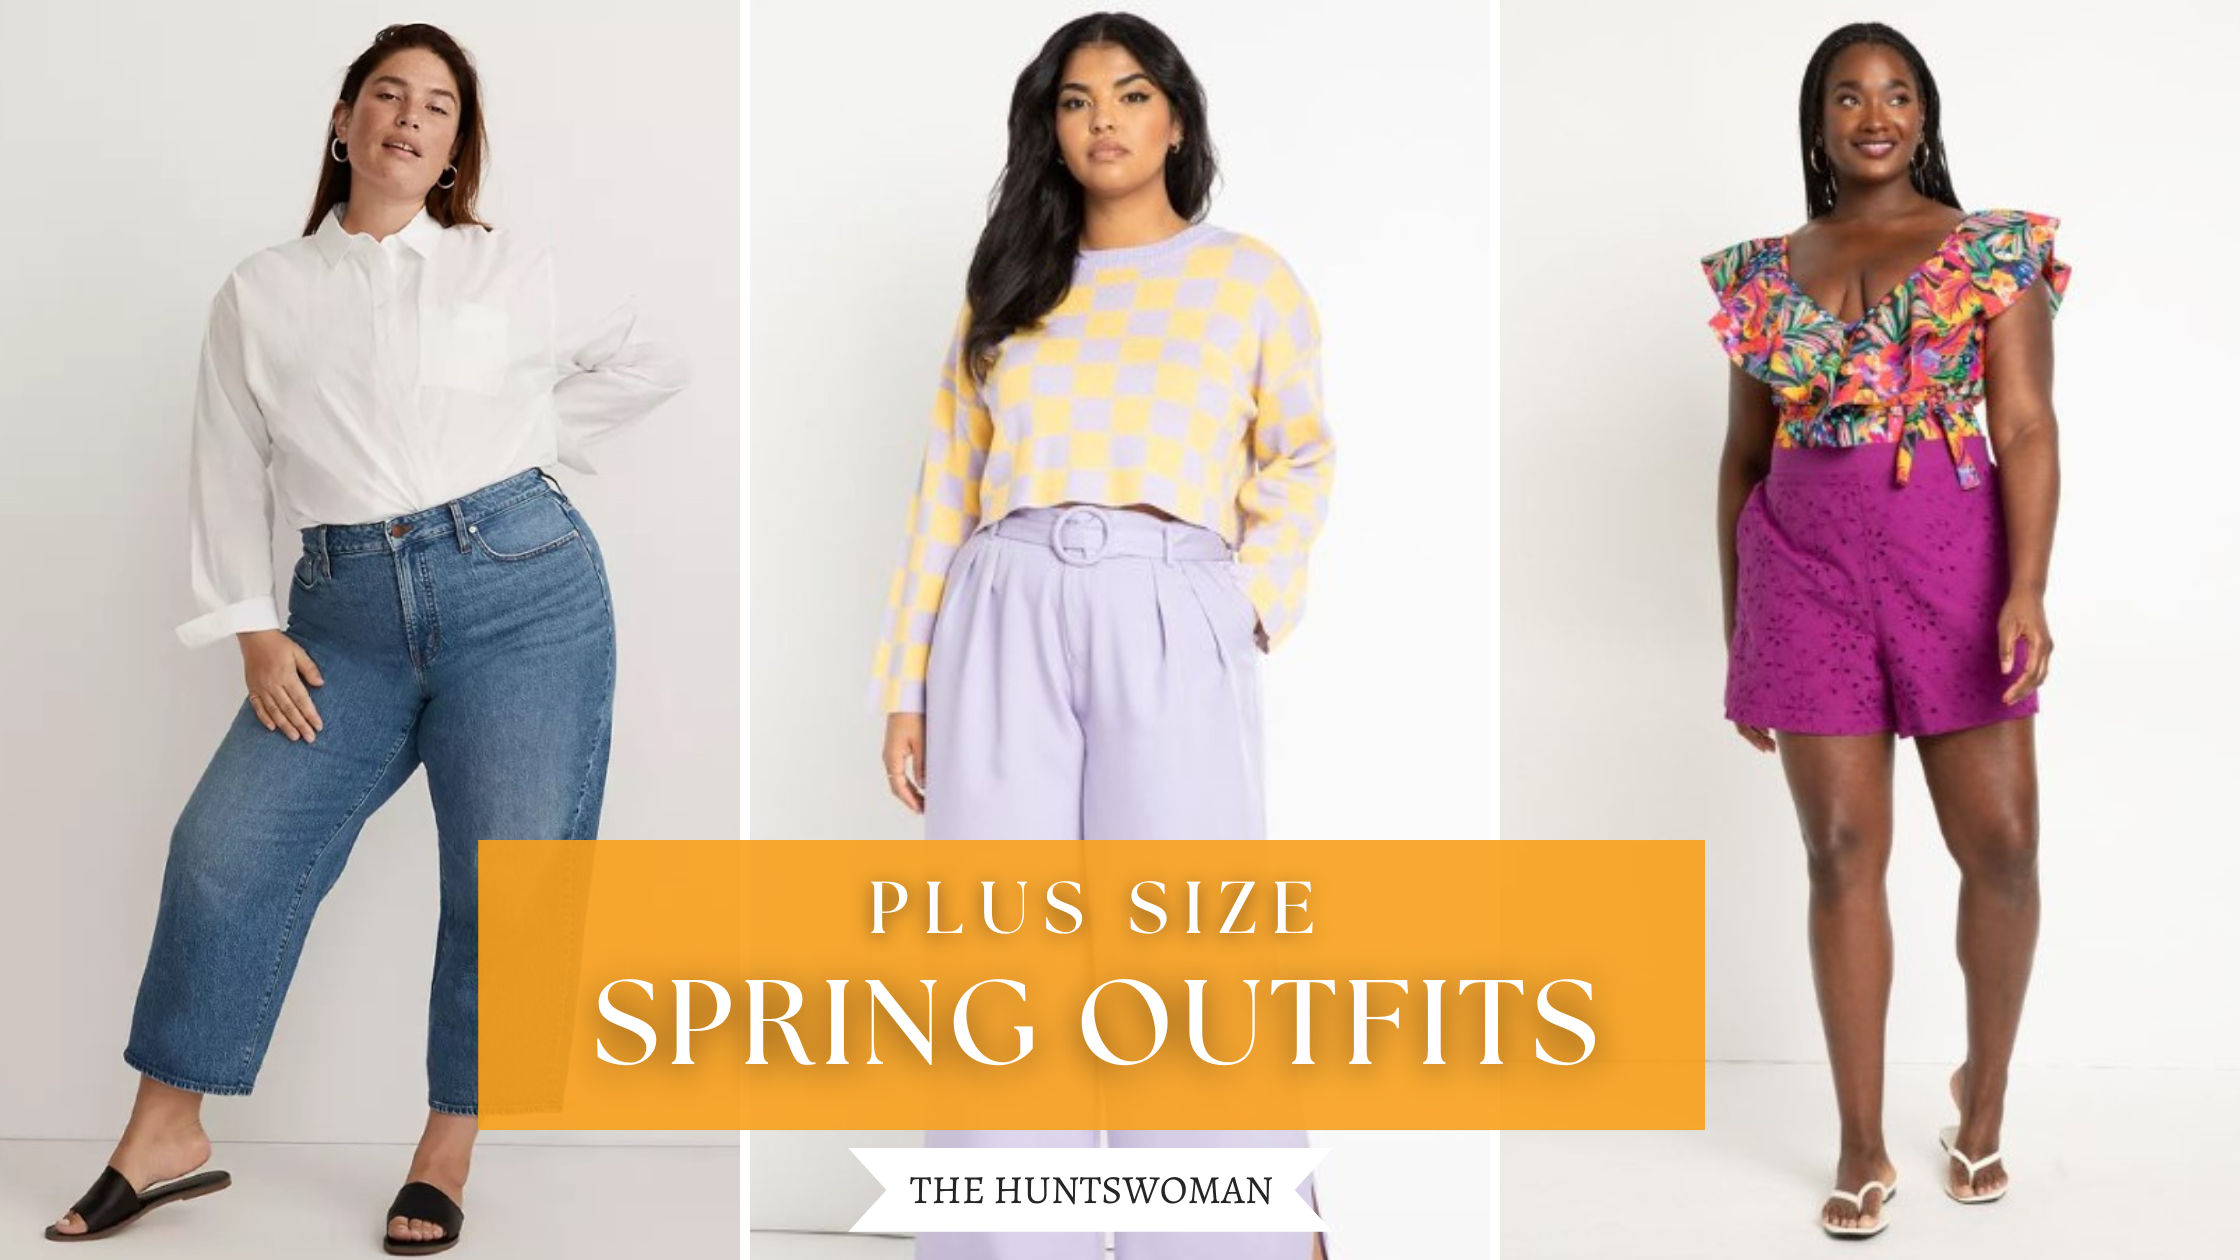 MIDSIZE/CURVY SPRING OUTFIT IDEAS 💙🦋 